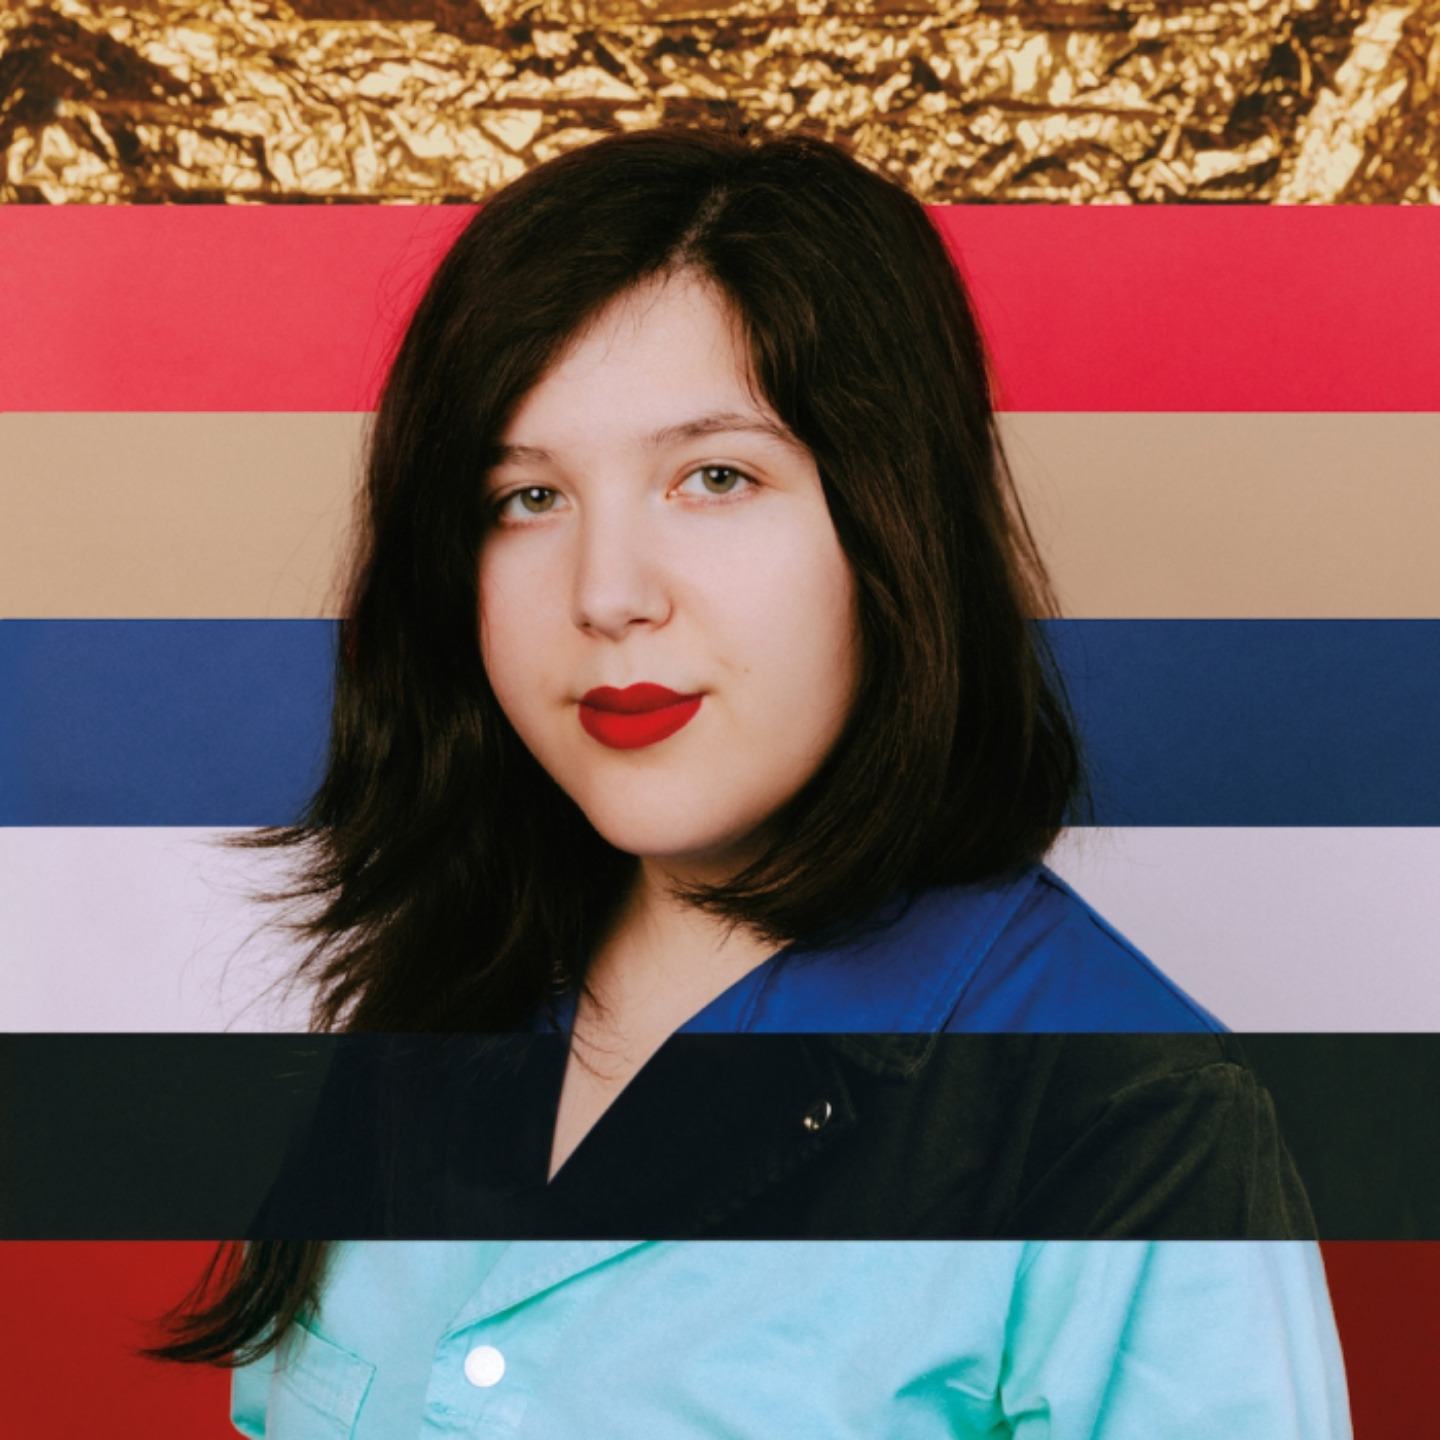 LUCY DACUS - 2019 12"